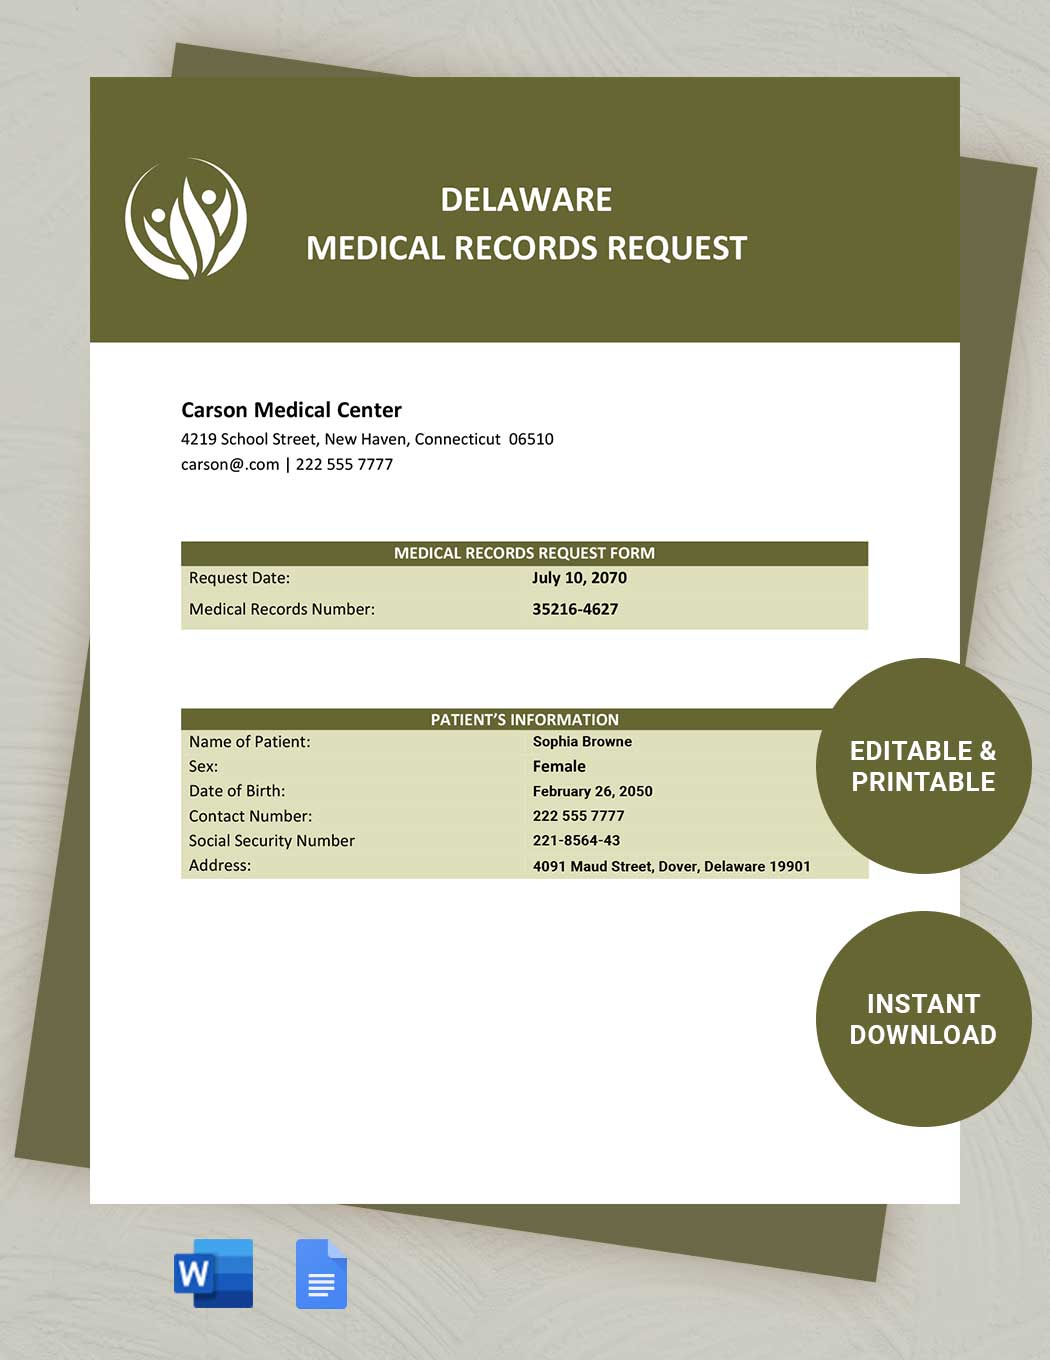 Delaware Medical Records Request Template in Word, Google Docs